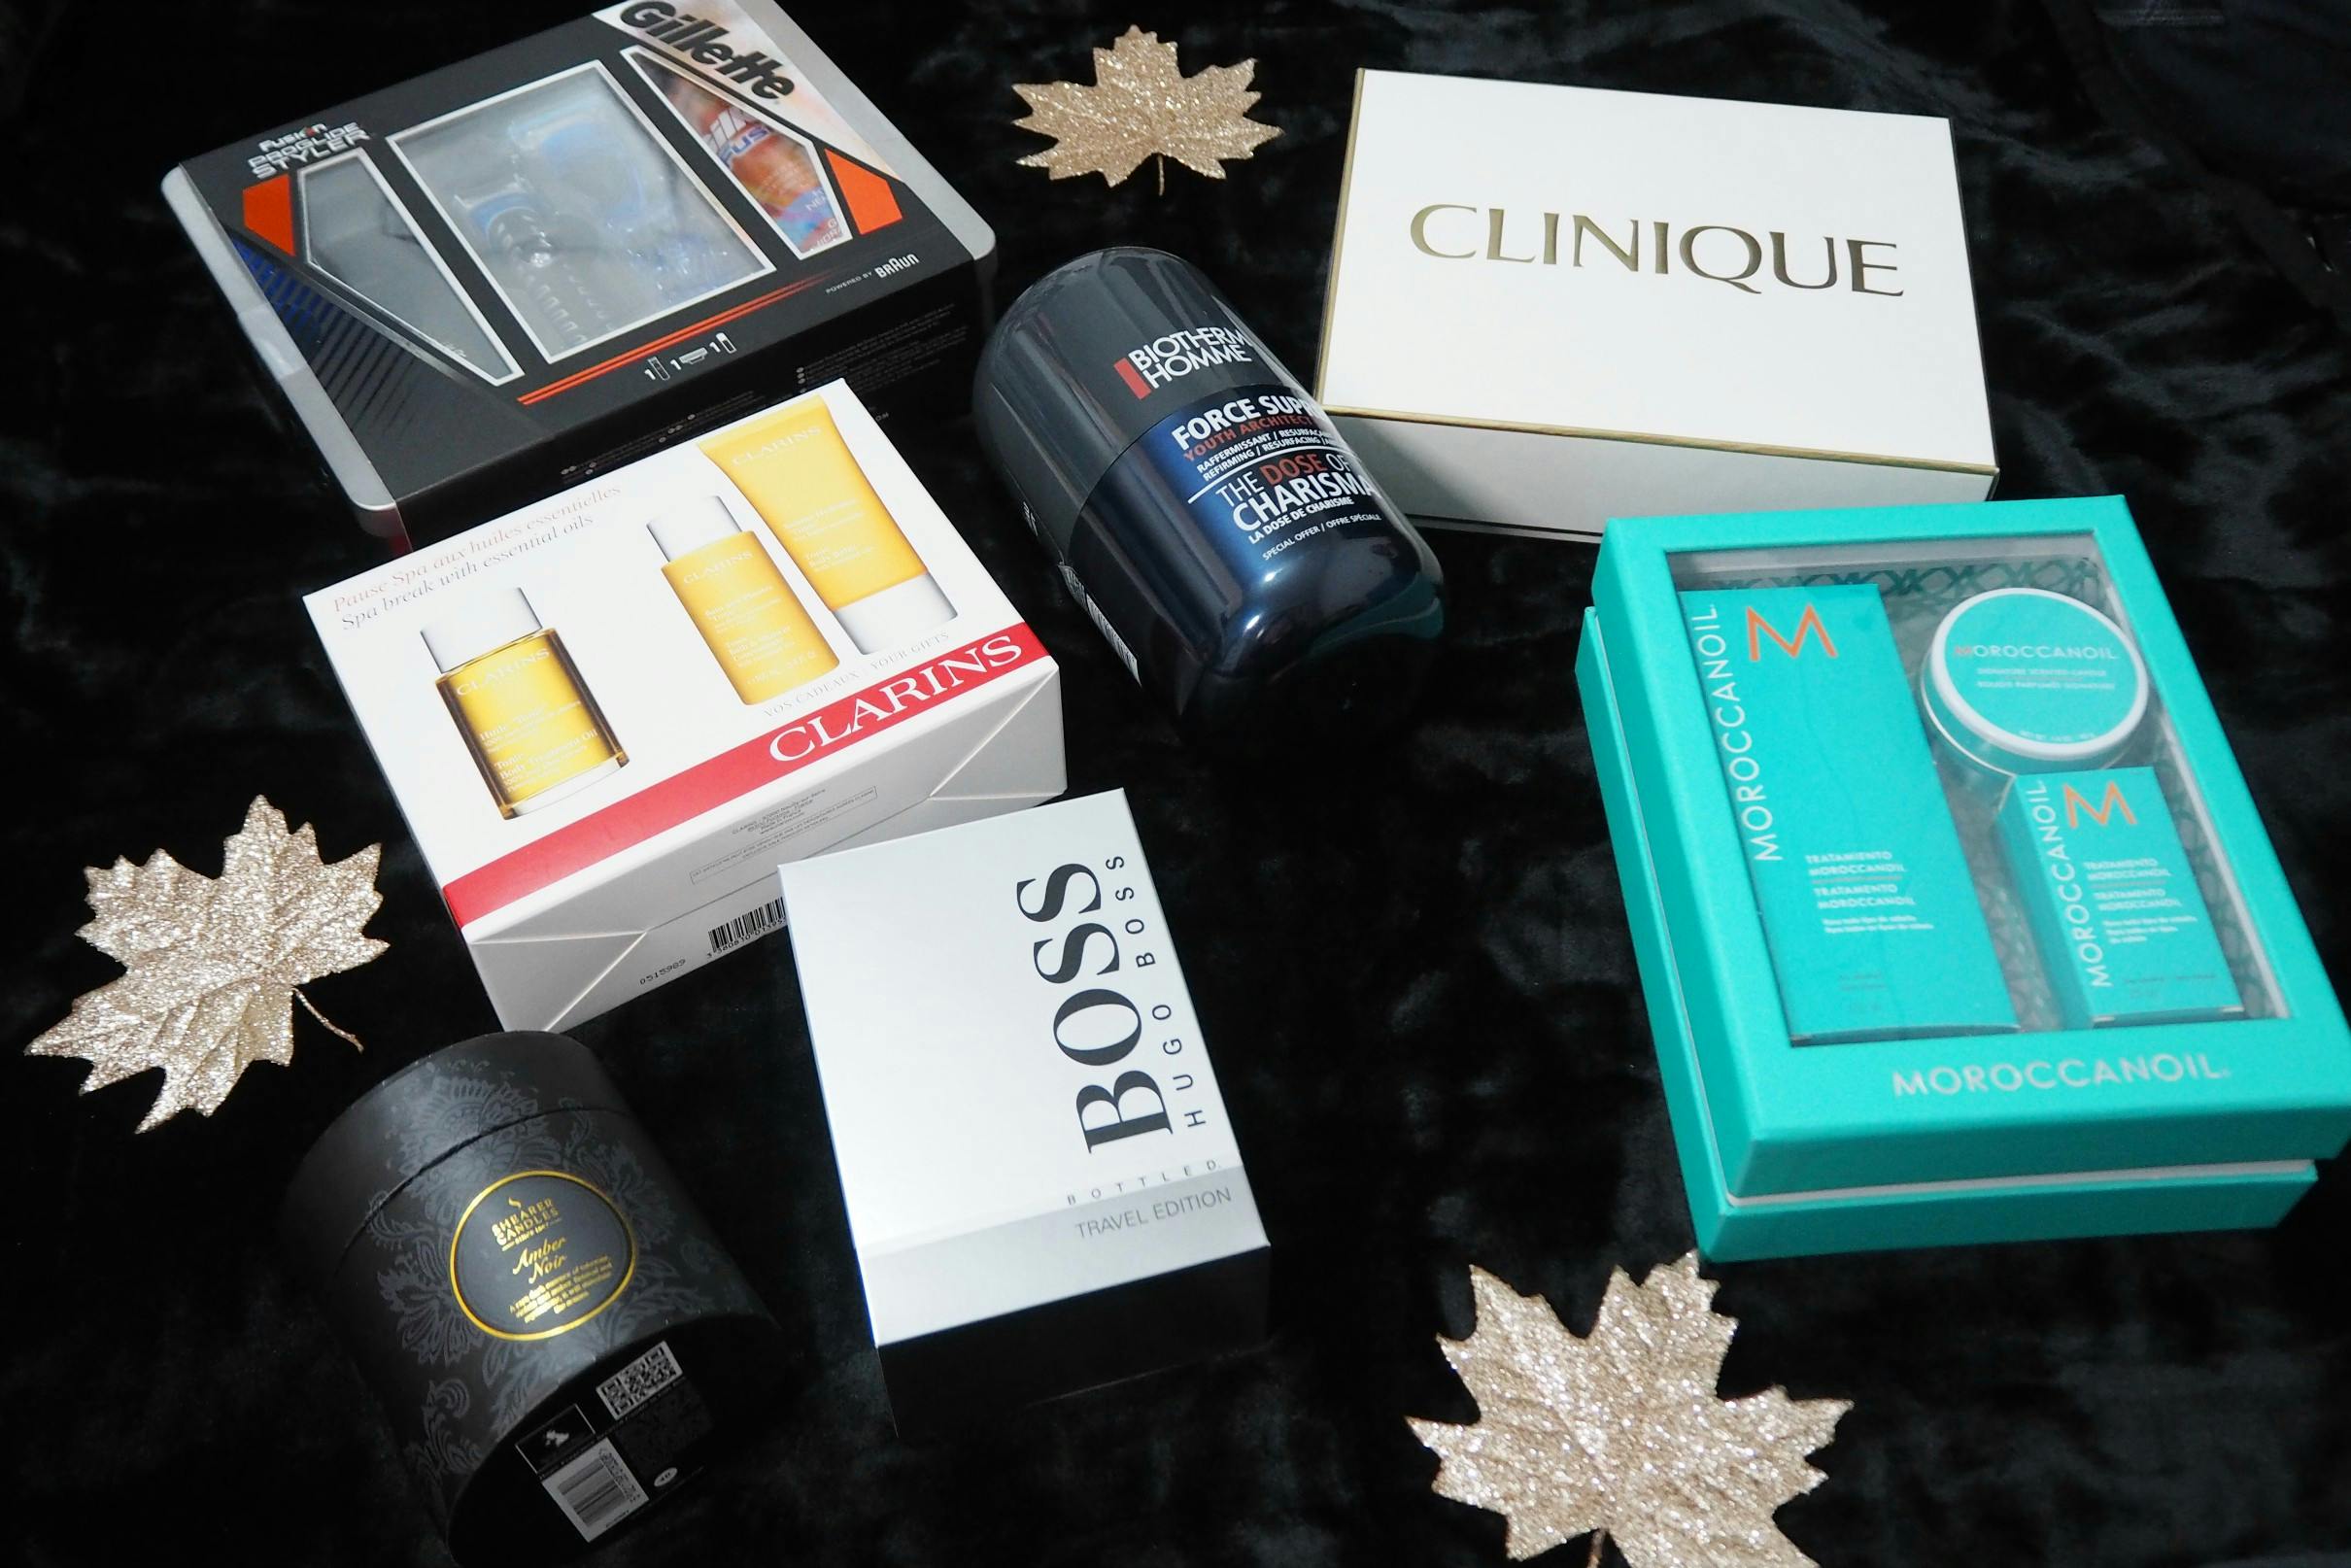 clinique, hugo boss, clarins, gillette fusion, clarins tonic, shearer candles